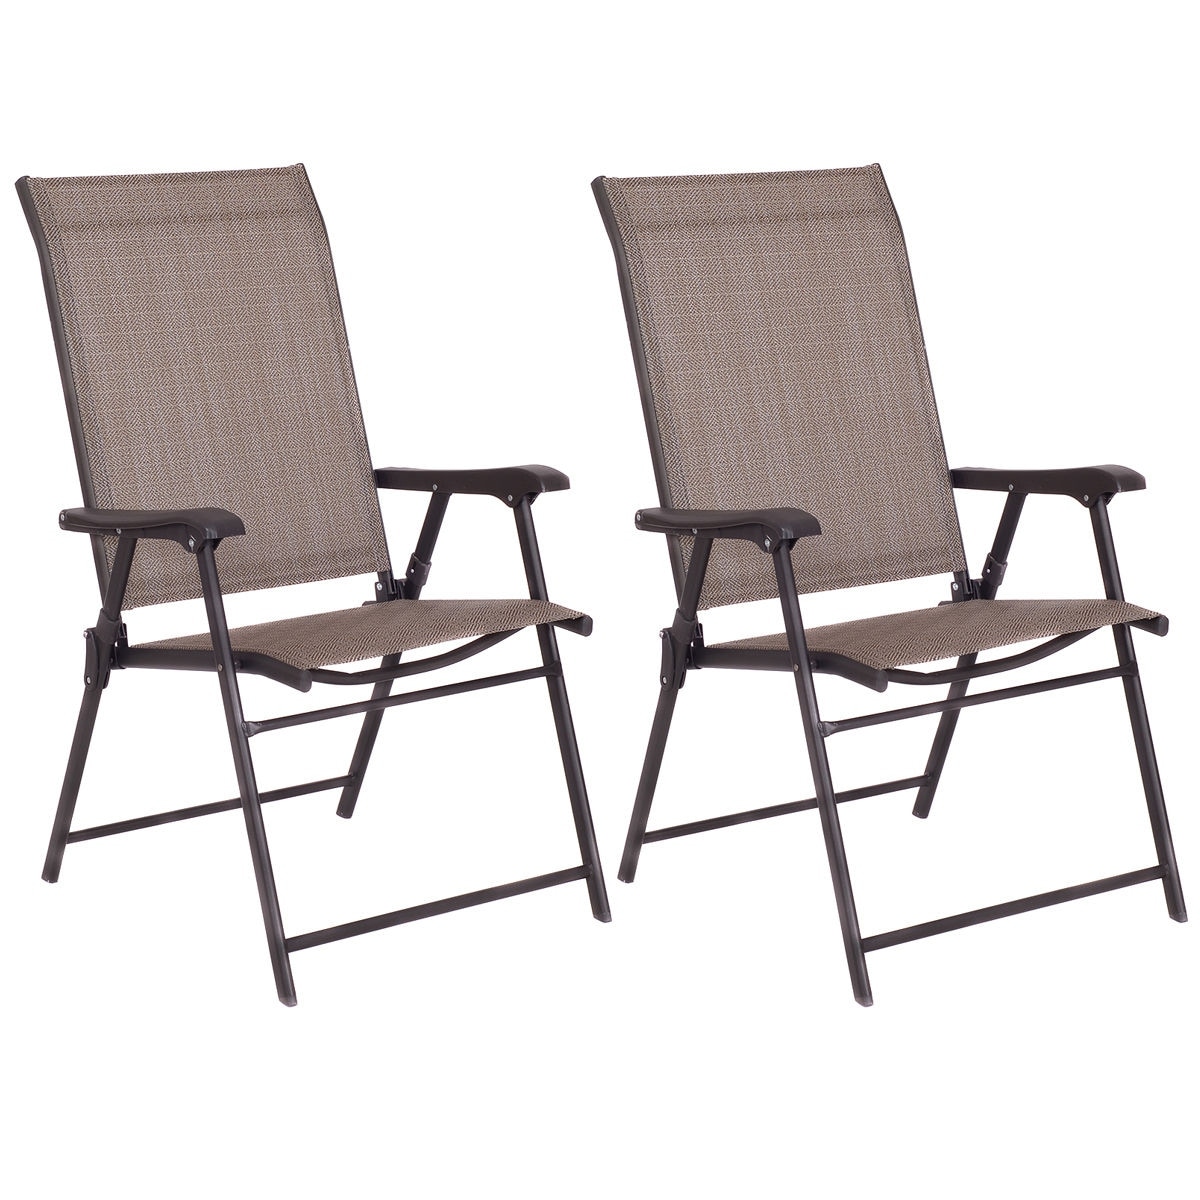 Costway Set Of 2 Patio Folding Sling Chairs Furniture Camping Deck Garden Pool Beach 